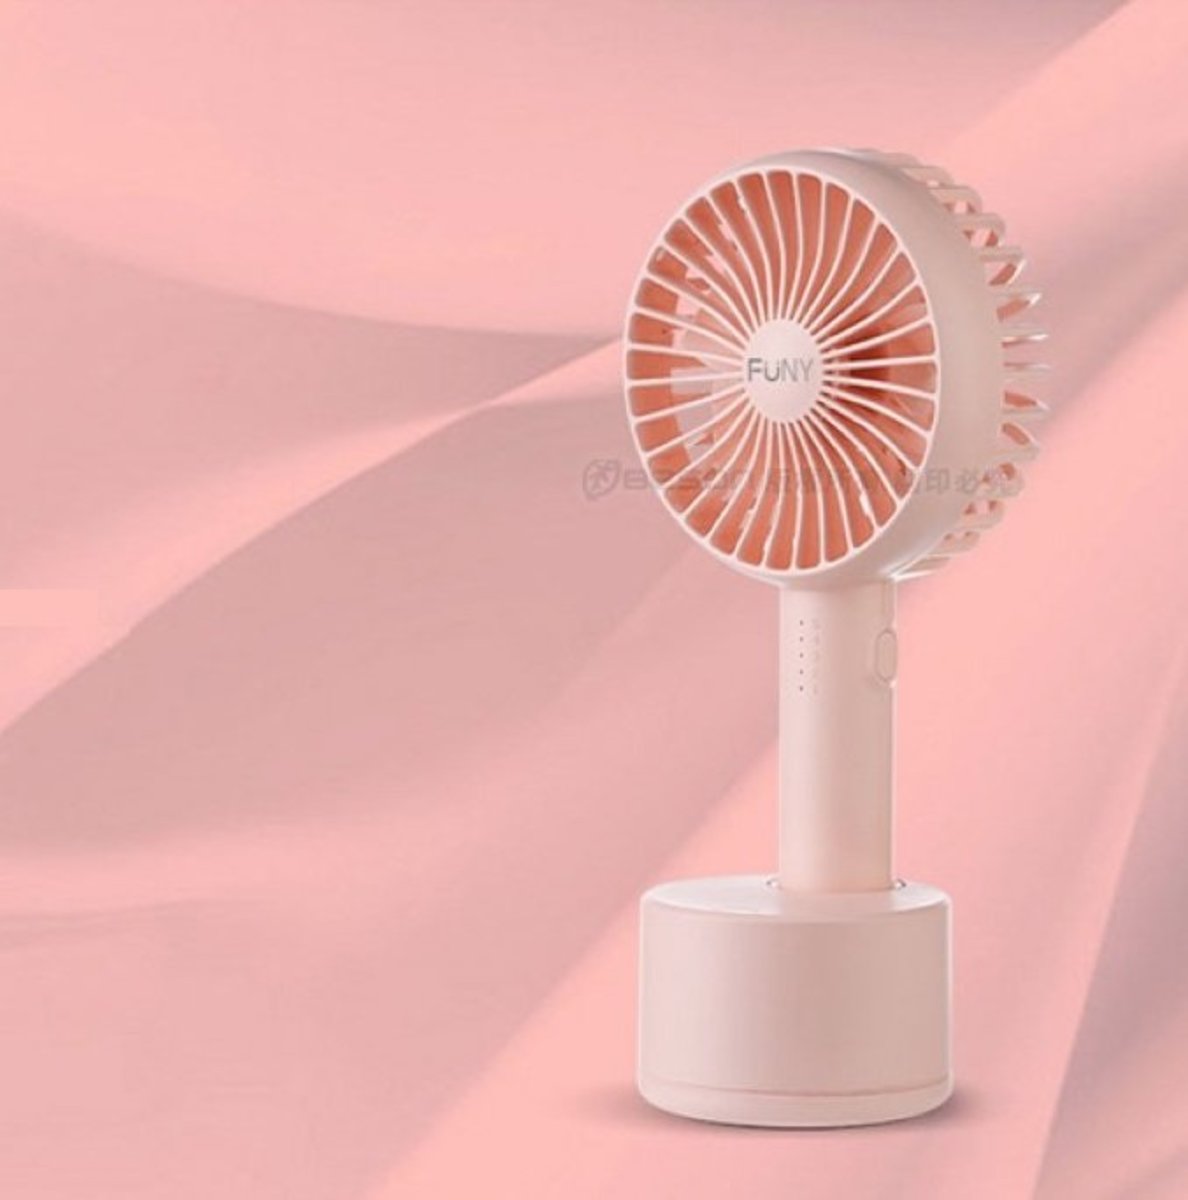 Funy - FU1901B 2-in-1 Rotary Stand Portable Fan - Pink